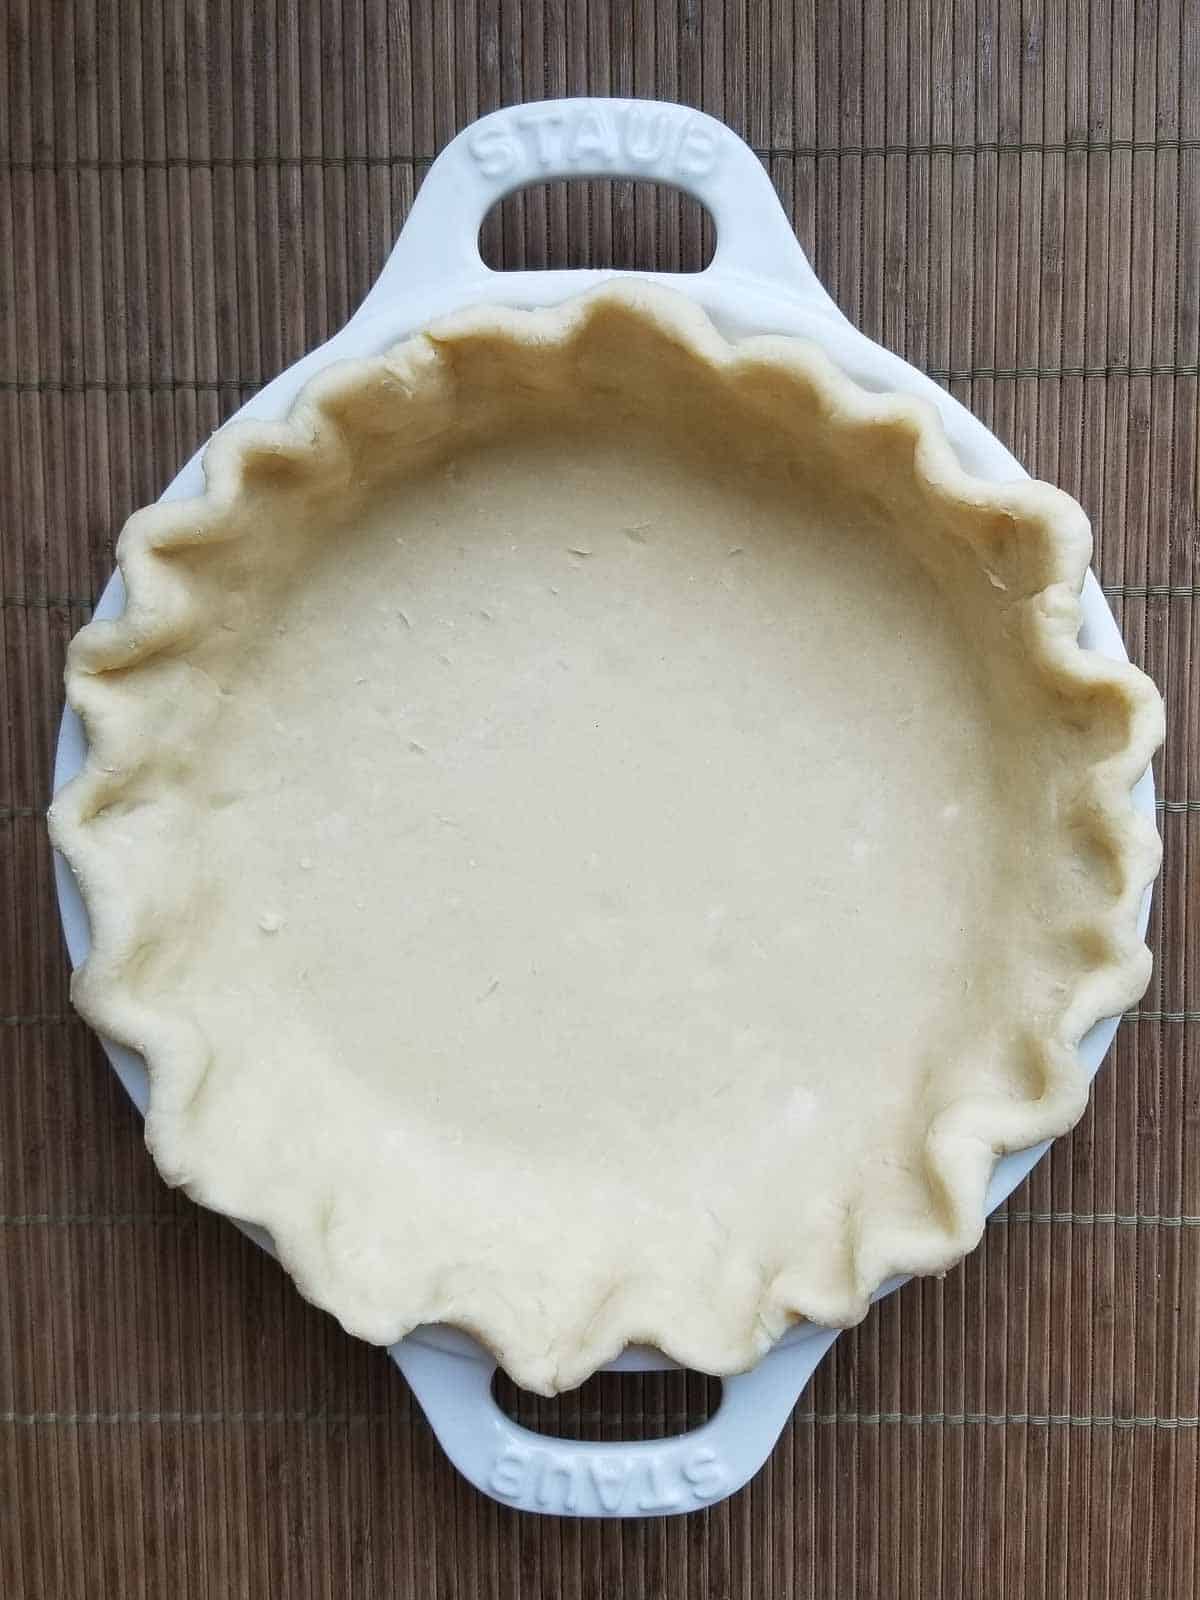 Unbaked pie dough crimped in a pie plate